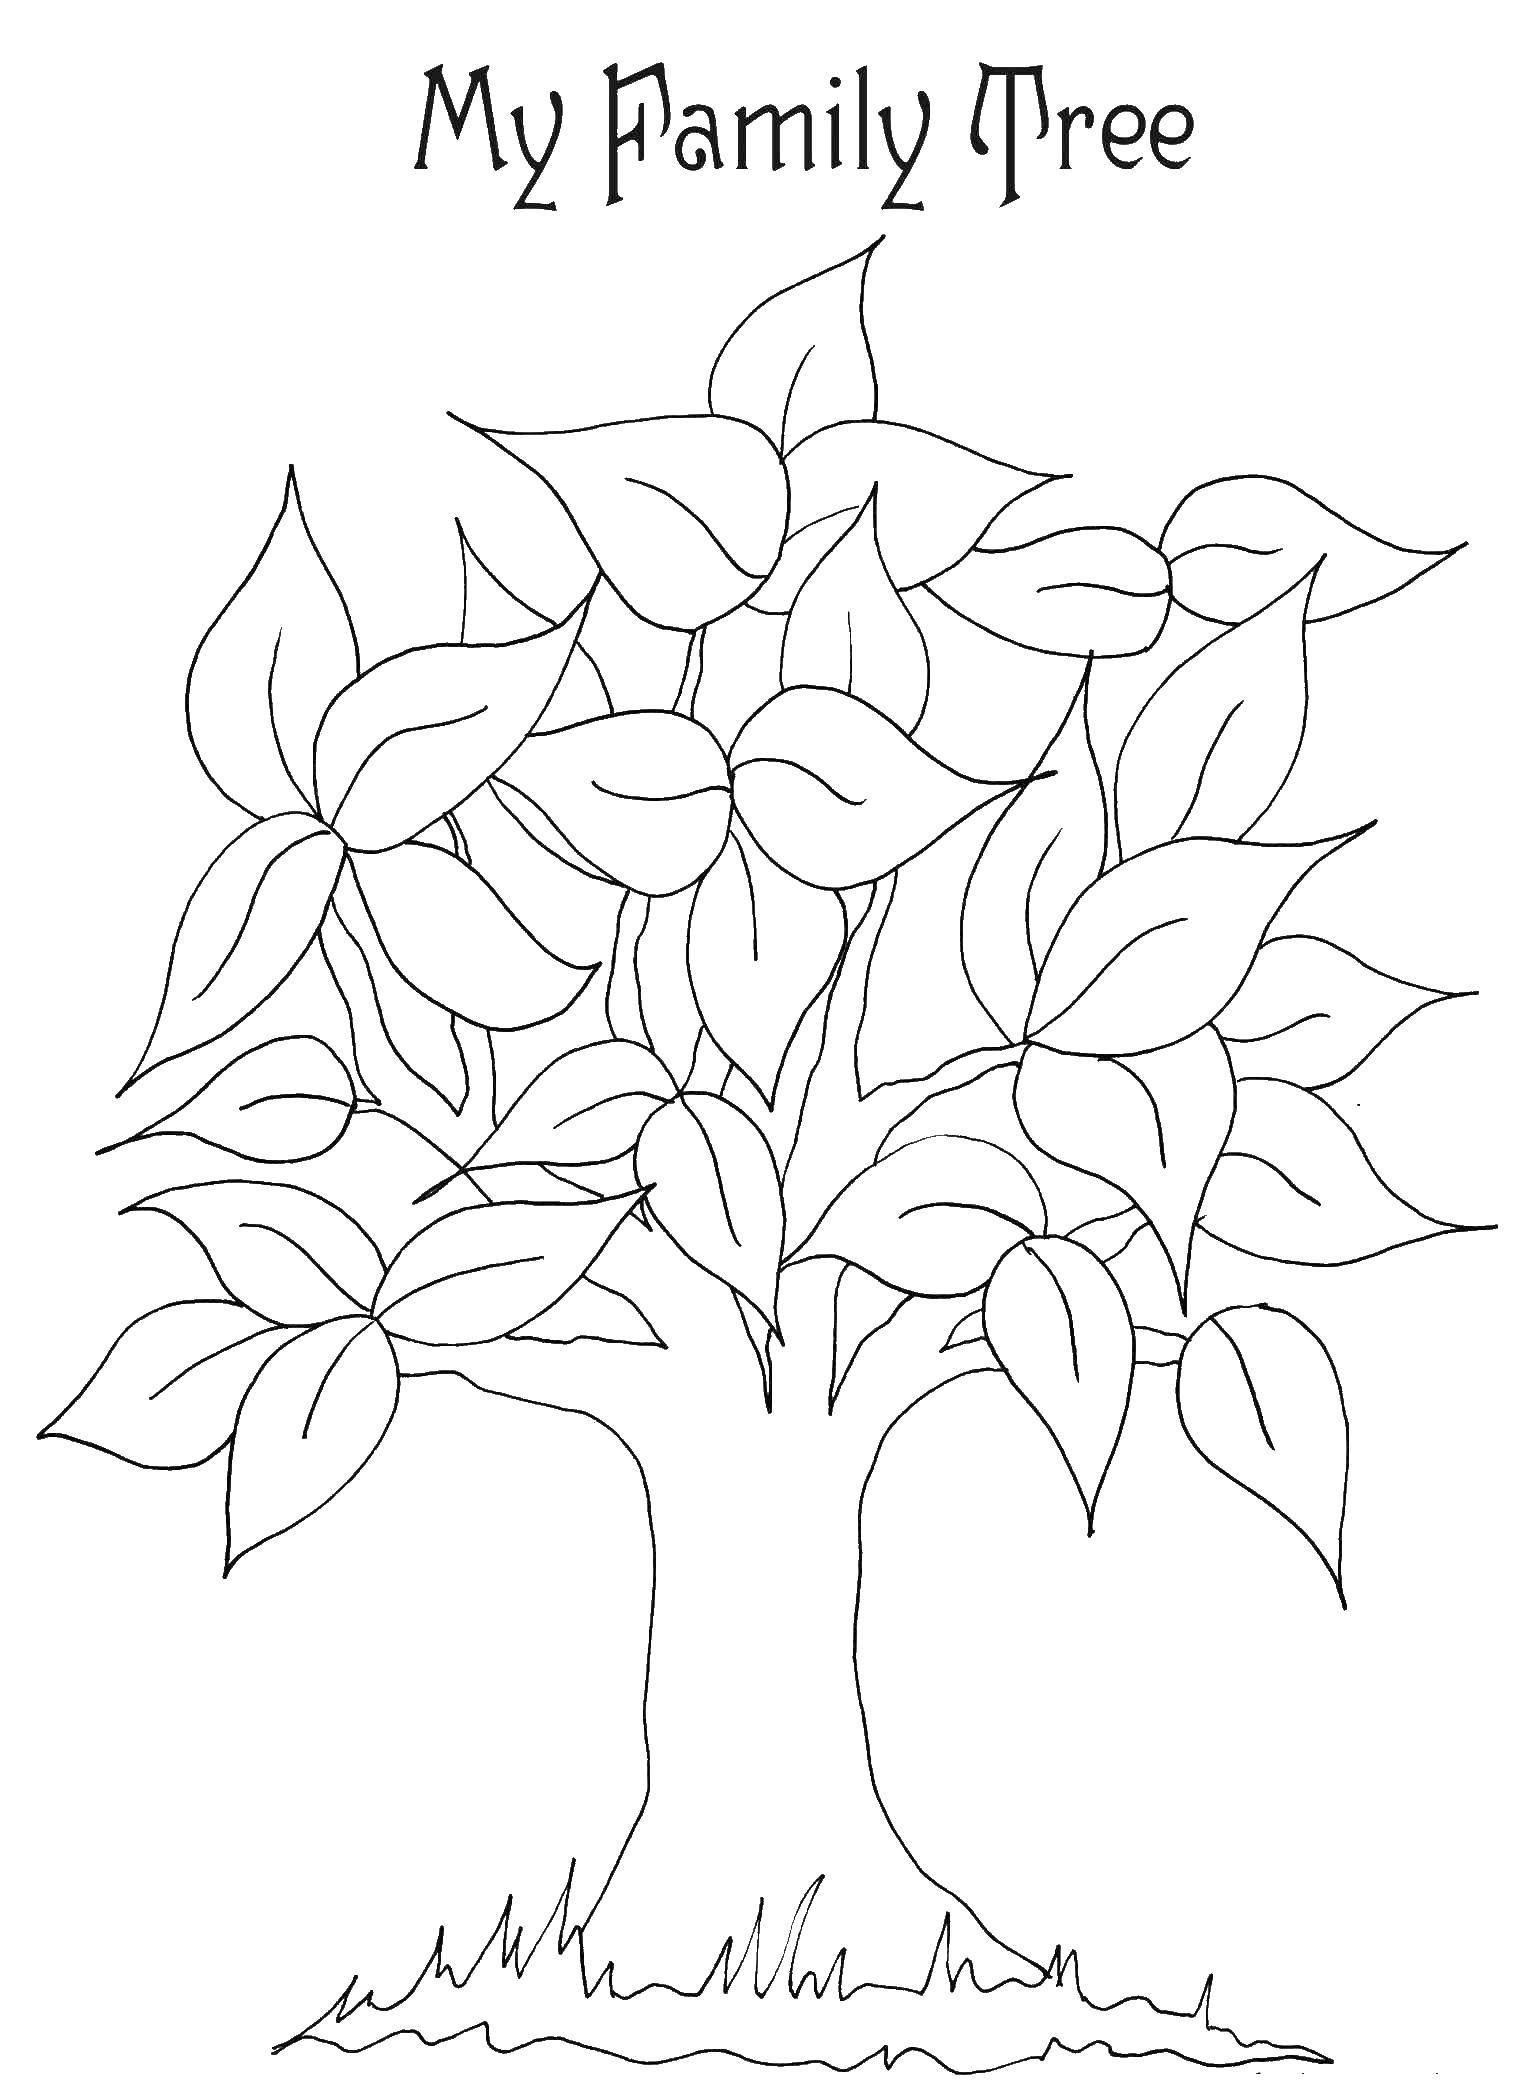 Coloring My family tree. Category Family tree. Tags:  Family, parents, children.